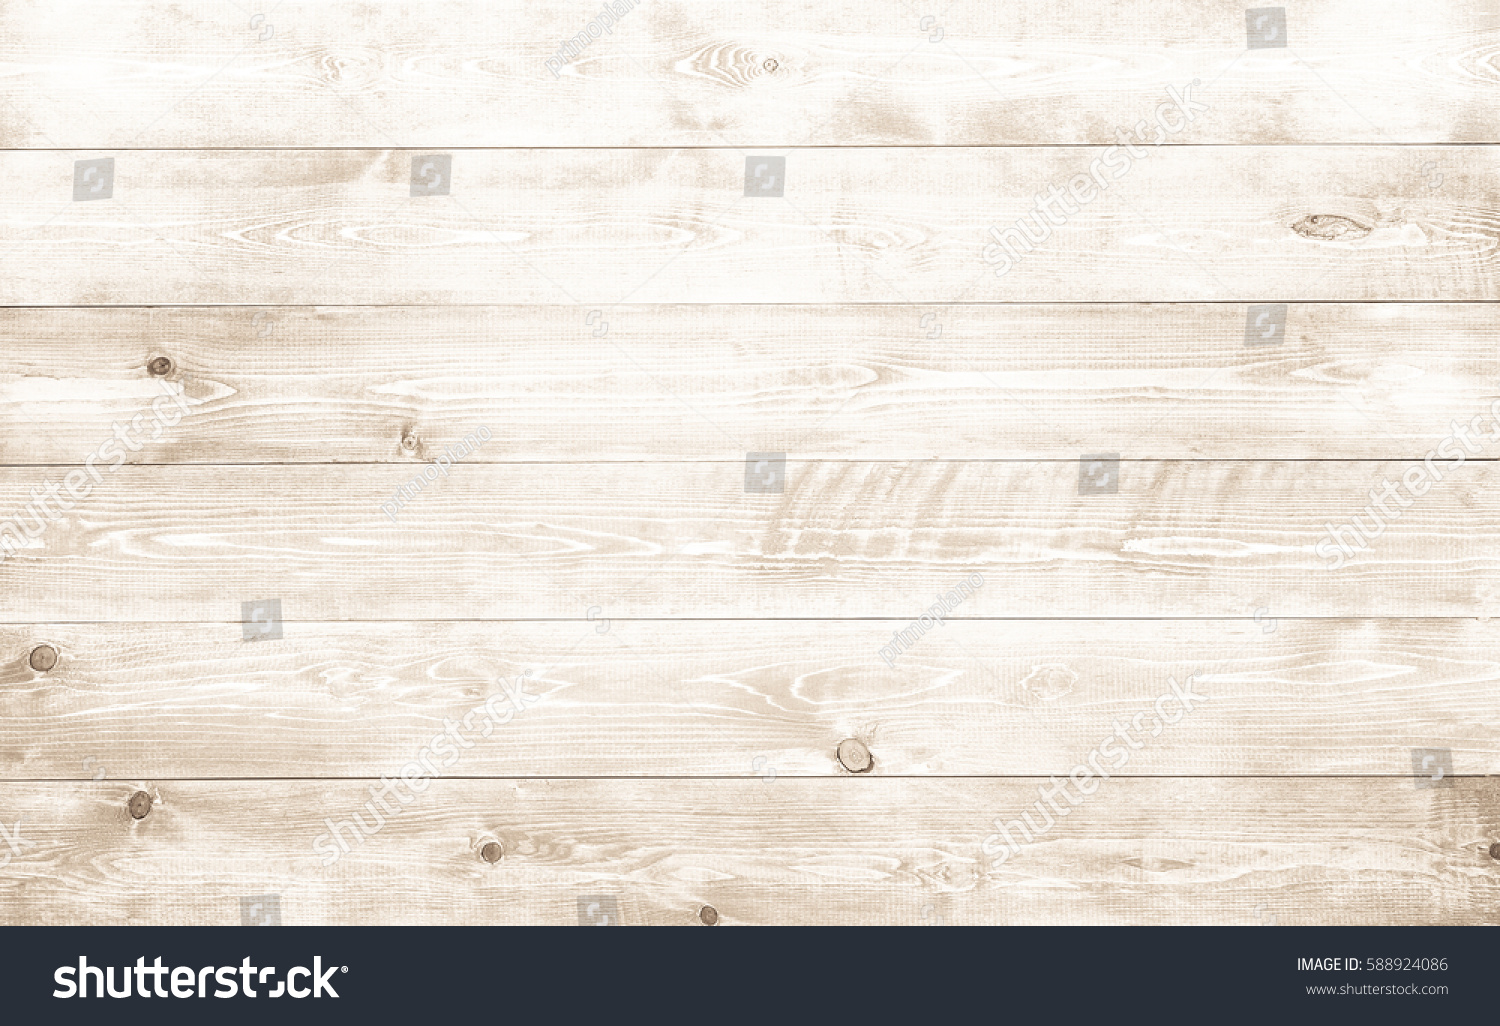 Light wood texture background surface with old natural pattern